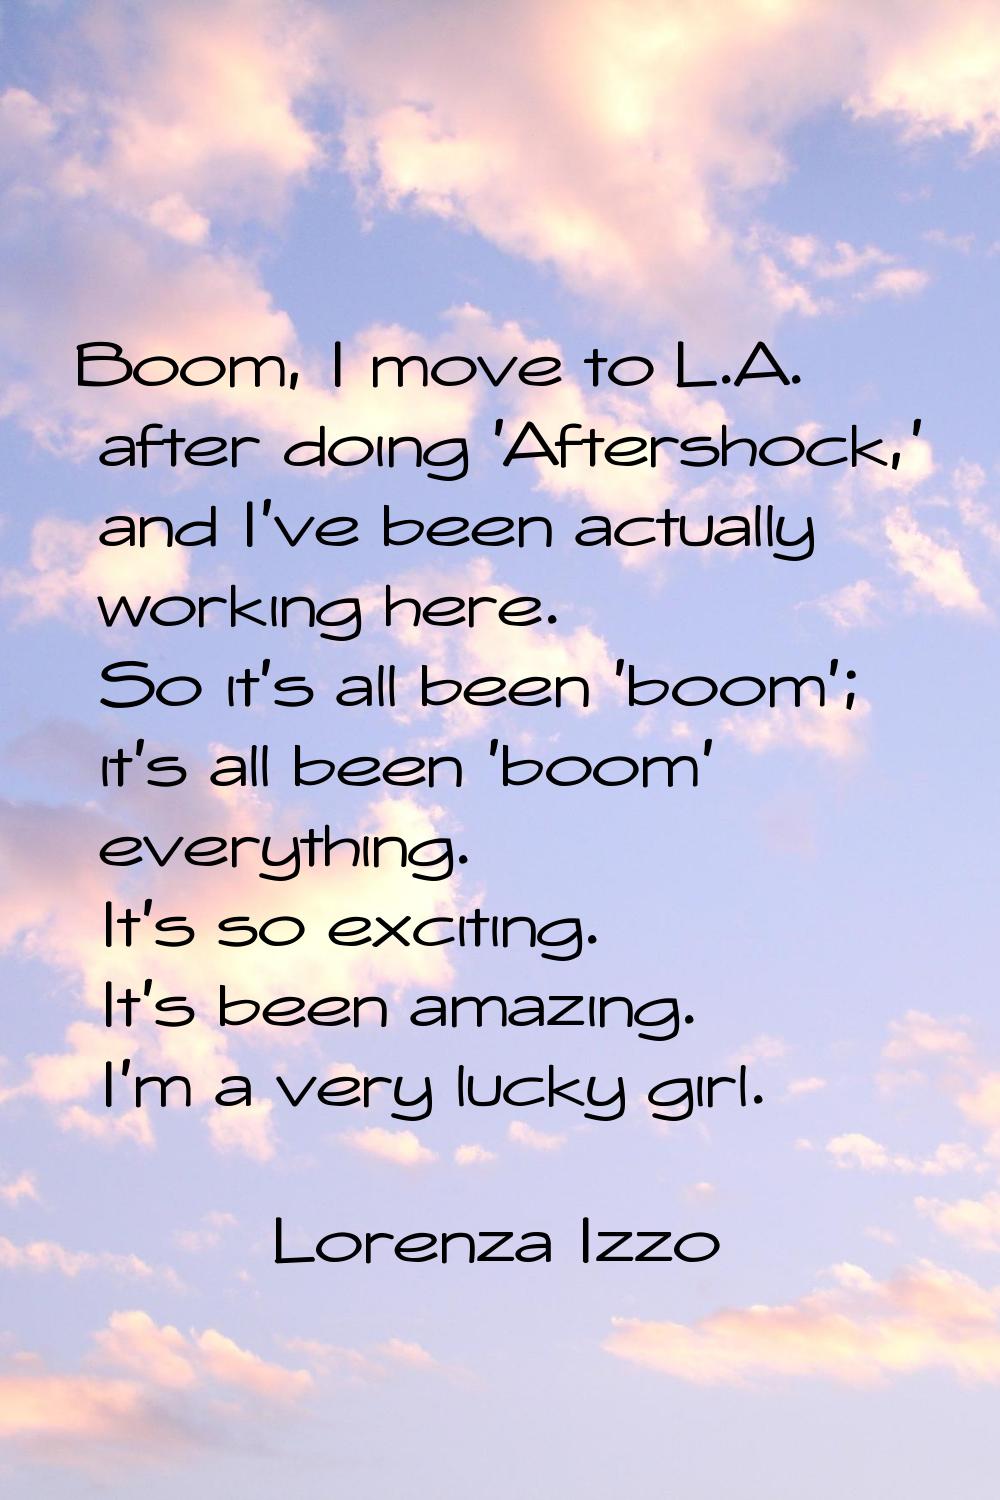 Boom, I move to L.A. after doing 'Aftershock,' and I've been actually working here. So it's all bee